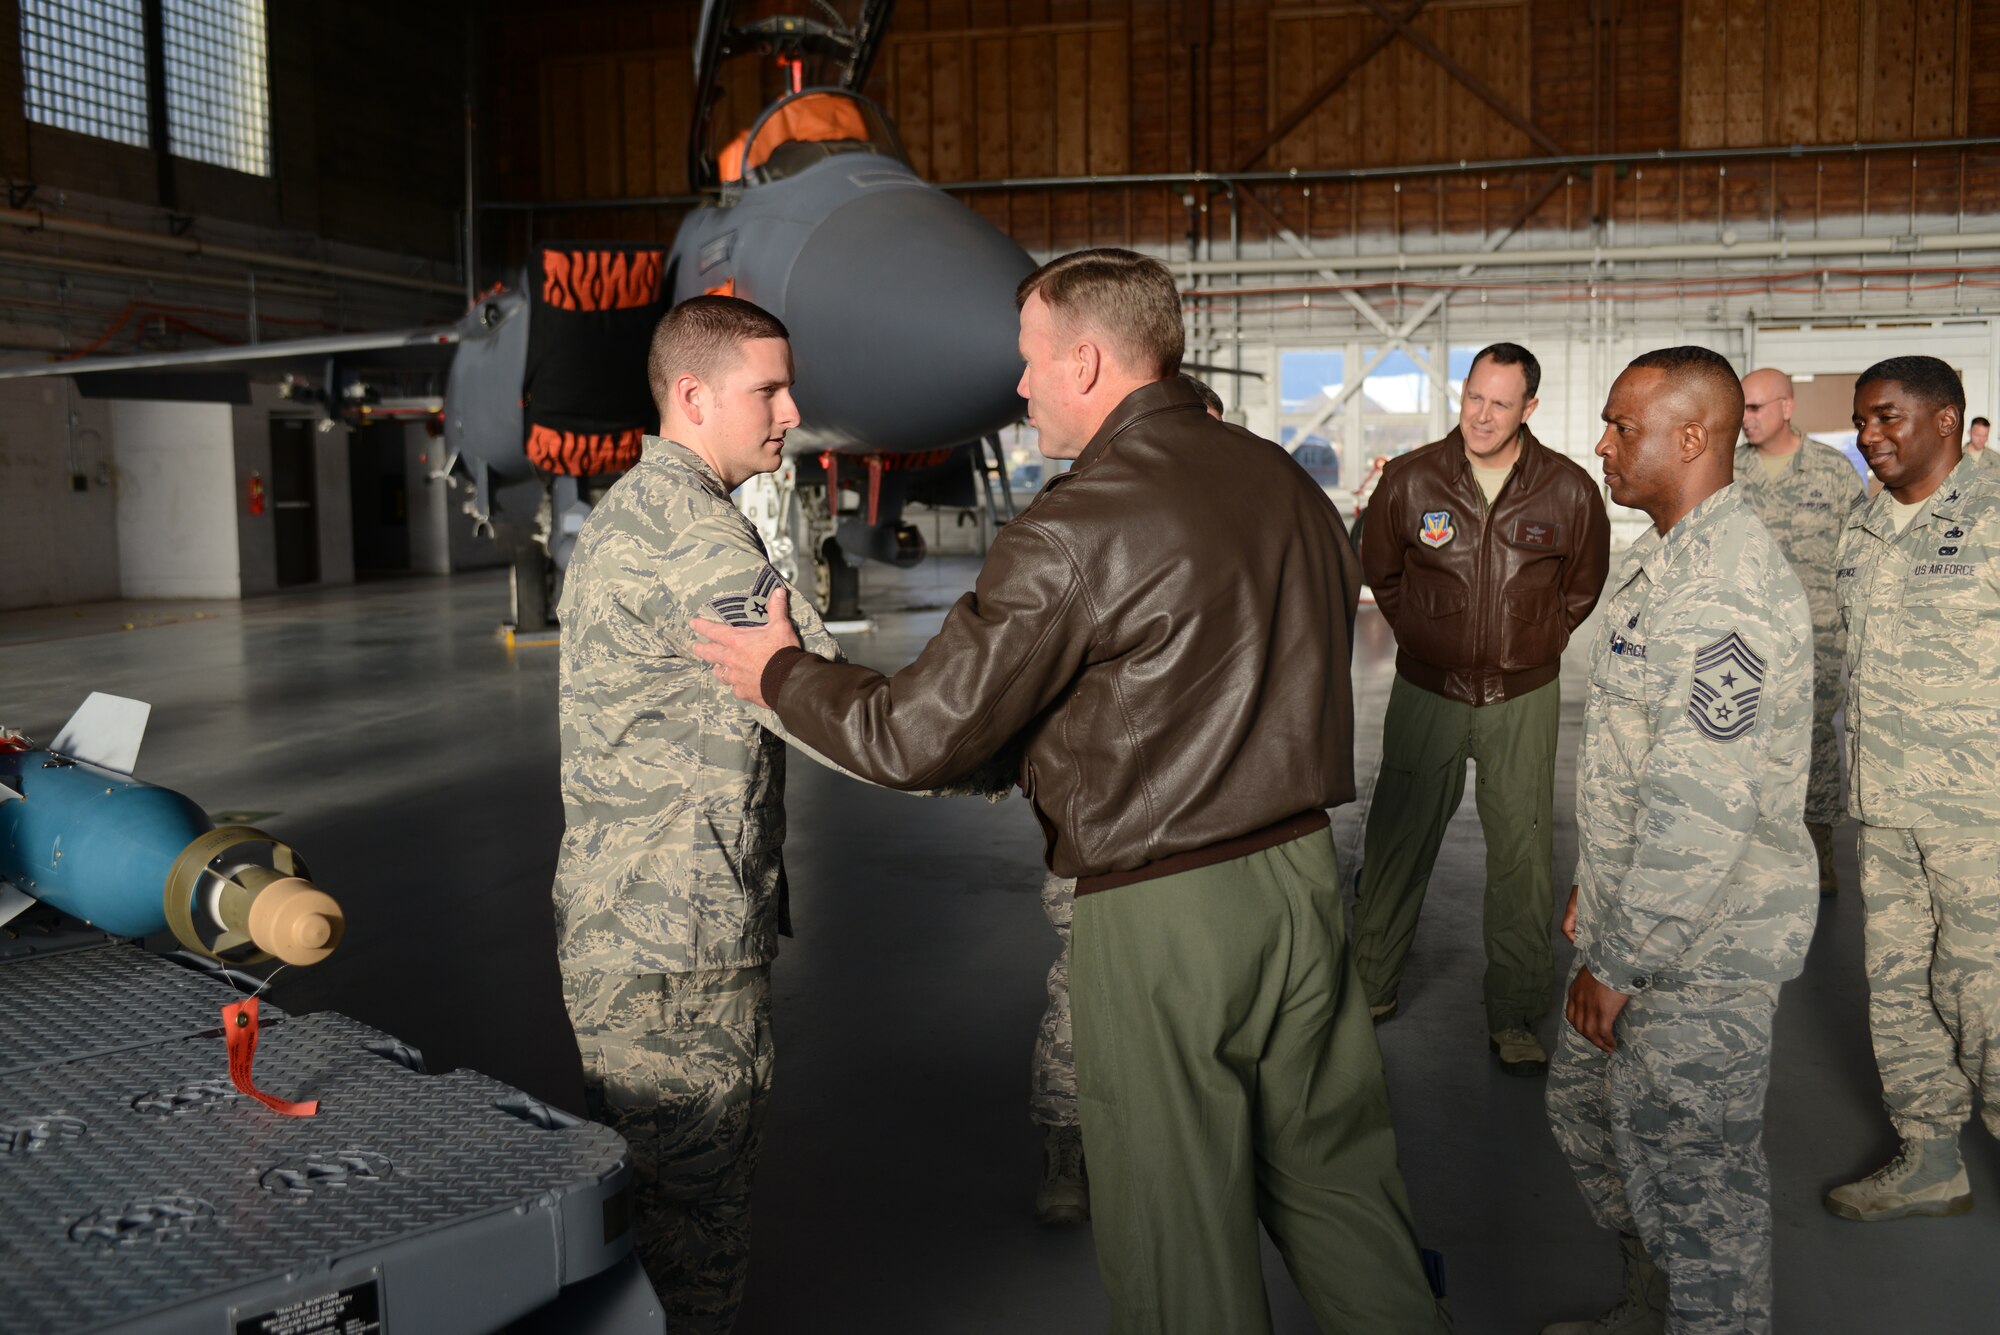 U.S. Air Force Lt. Gen. Tod Wolters, 12th Air Force (Air Forces Southern) commander, shakes hands with Staff Sgt. Josh Paige, 366th Aircraft Maintenance Squadron crew chief, Nov. 19, 2013, at Mountain Home Air Force Base, Idaho. The 366th AMXS is responsible for the flightline maintenance of 48 F-15E aircraft in the 389th and 391st Aircraft Maintenance Units and 12 F-15SG aircraft in the 428th AMU. (U.S. Air Force photo by Senior Airman Benjamin Sutton/Released)